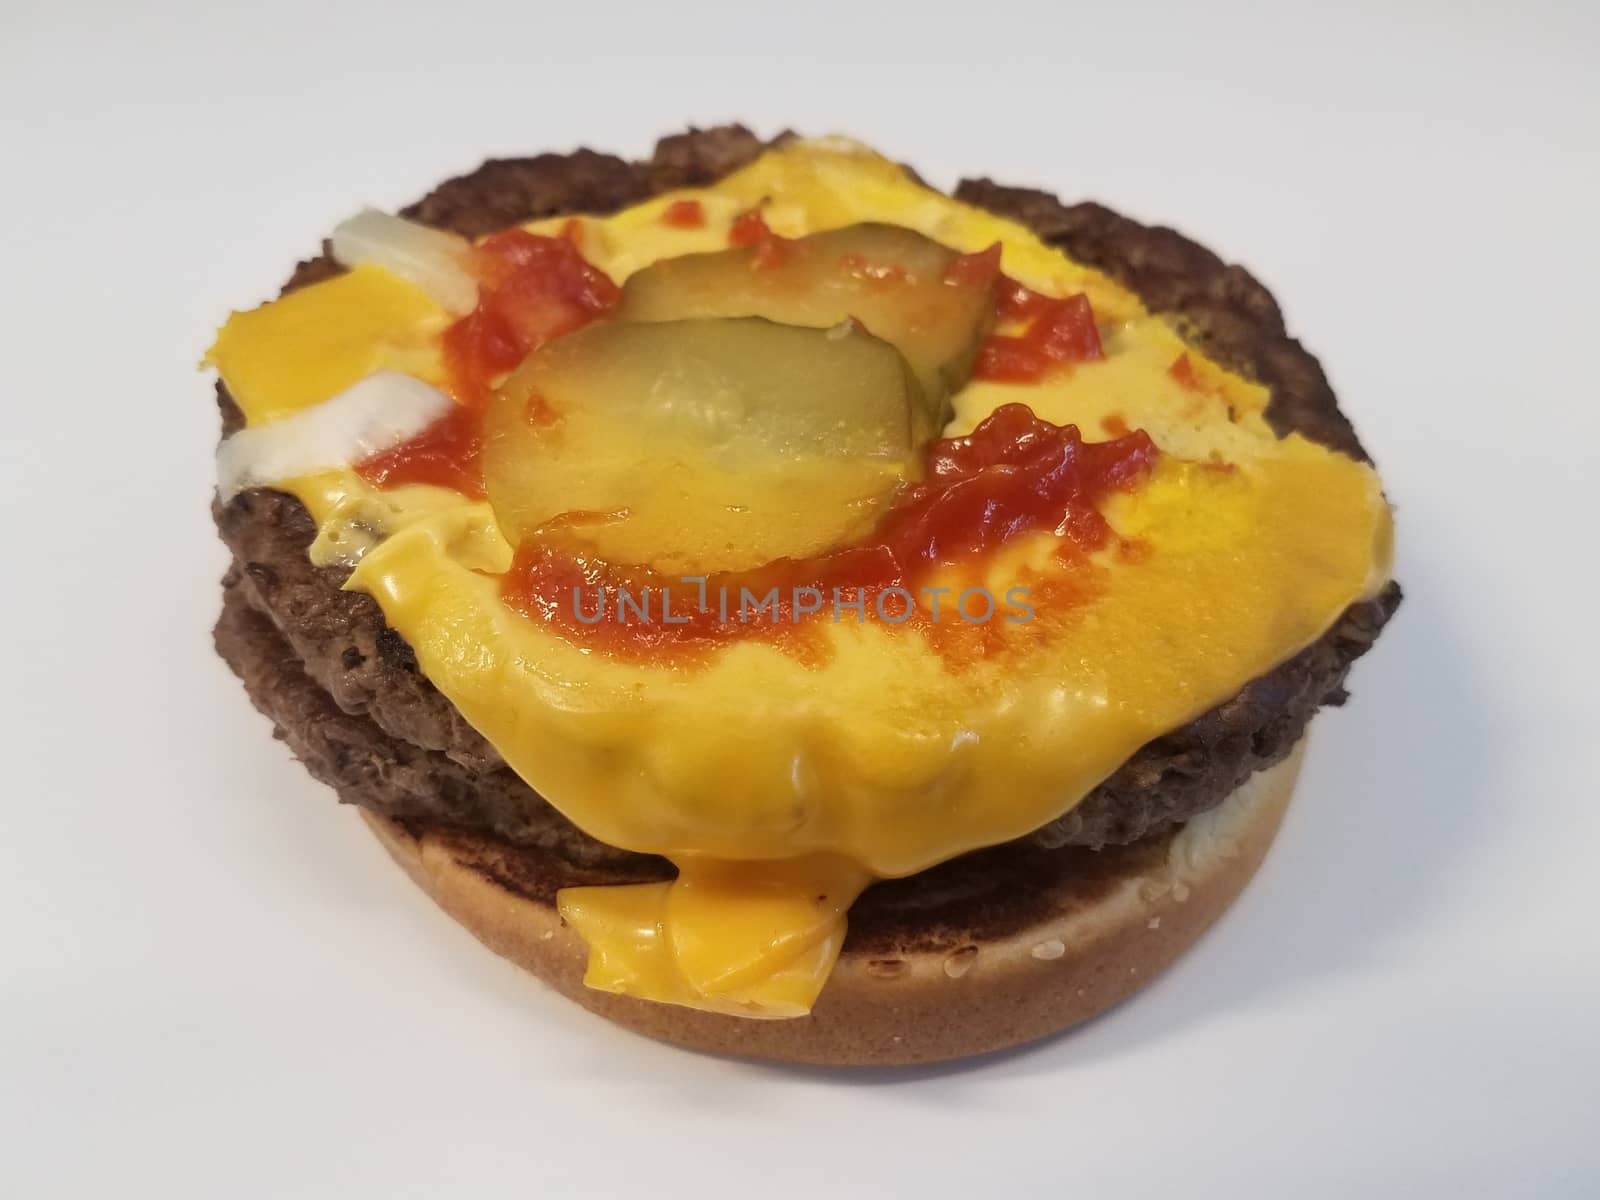 hamburger with cheese and pickles and ketchup on white surface by stockphotofan1